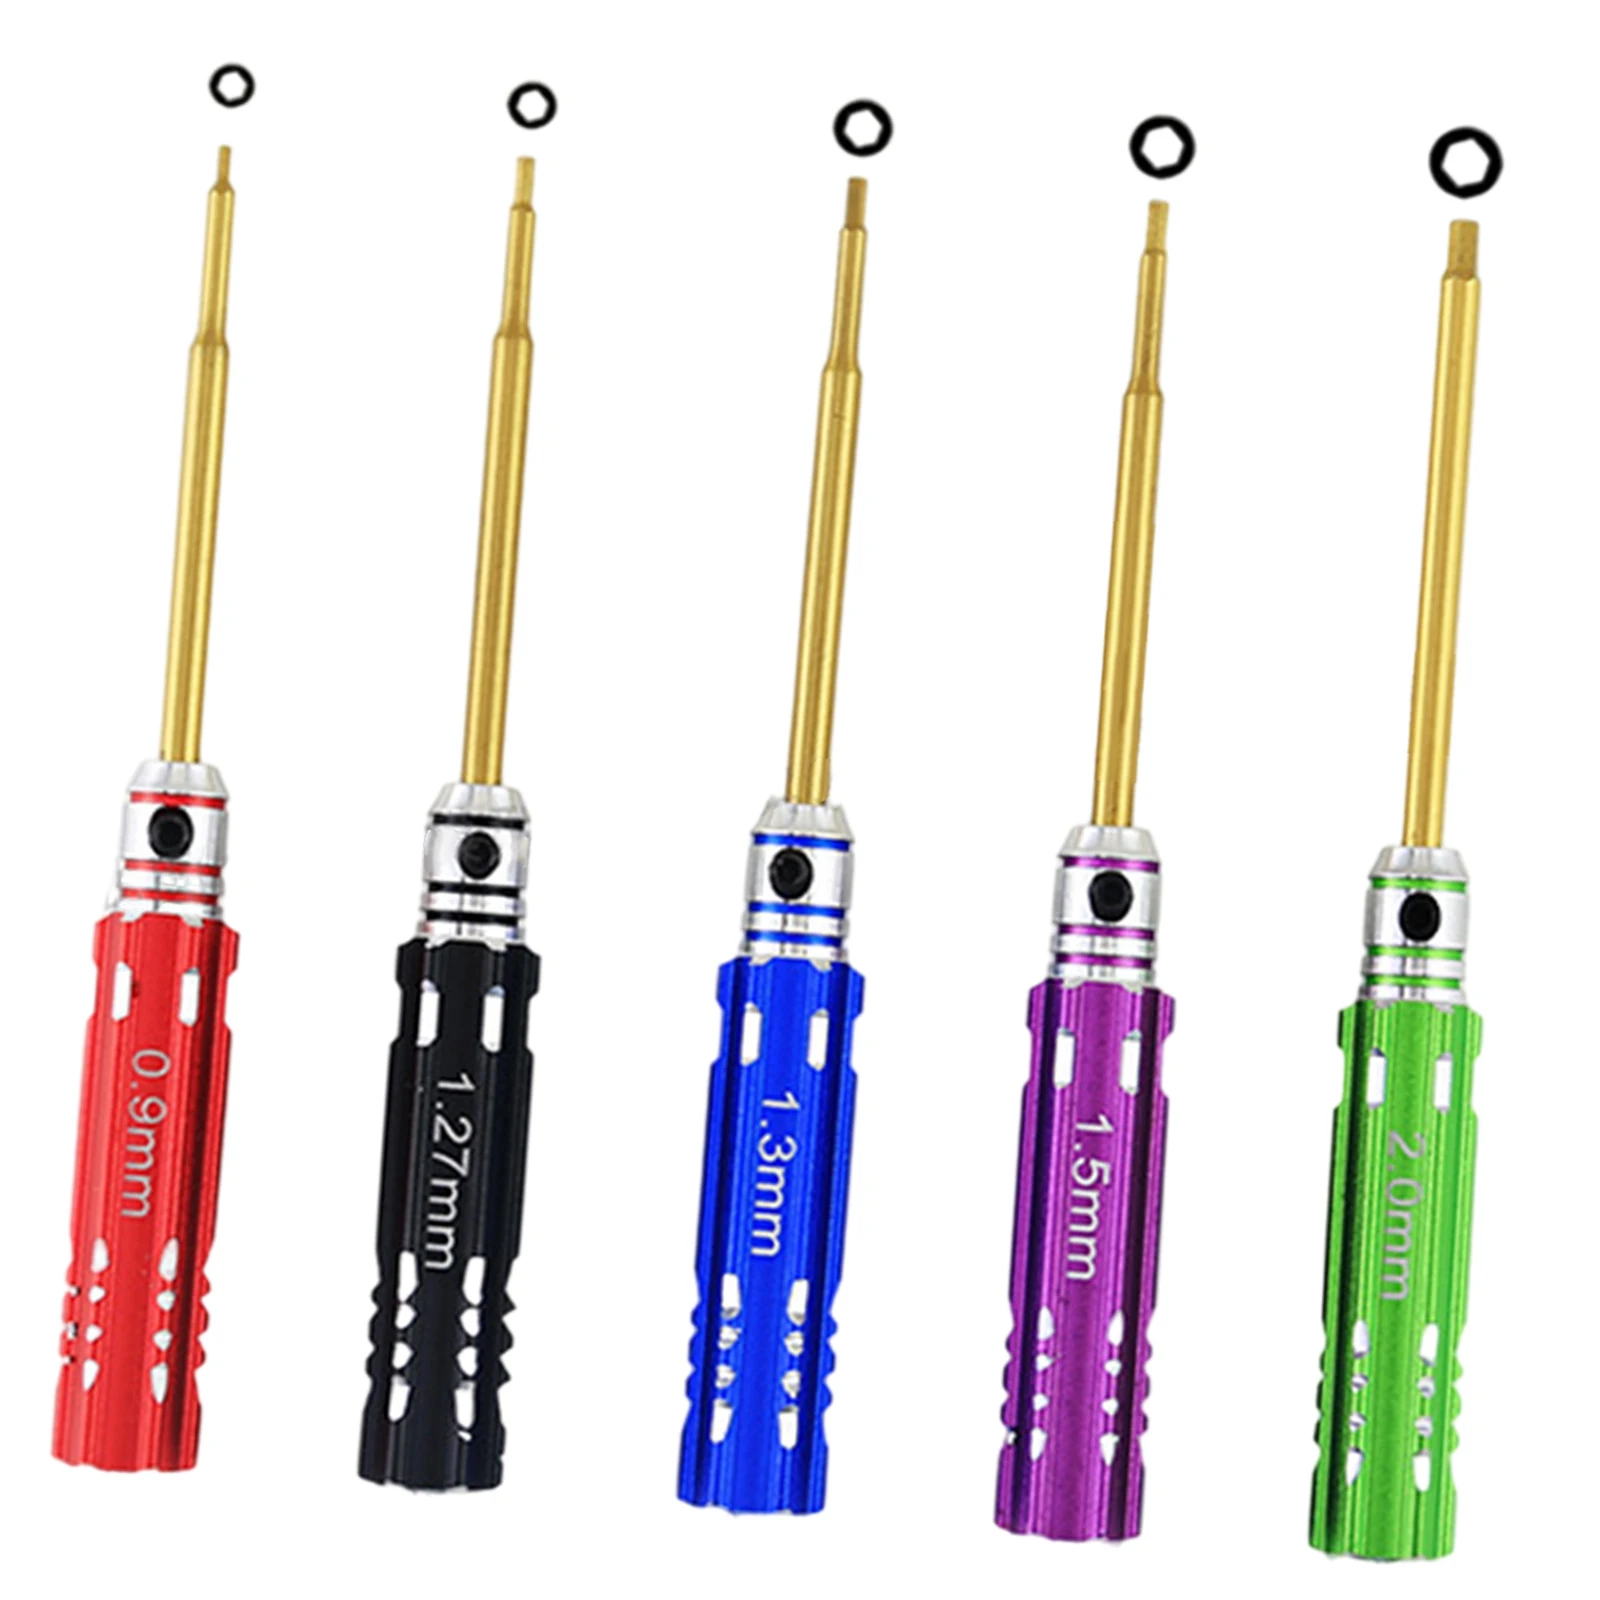 5Pcs Metal Hex Screw Driver Hexagon Repair RC Tool 0.9/1.27/1.3/1.5/2.0mm for RC Model Helicopter Plane Car Drone